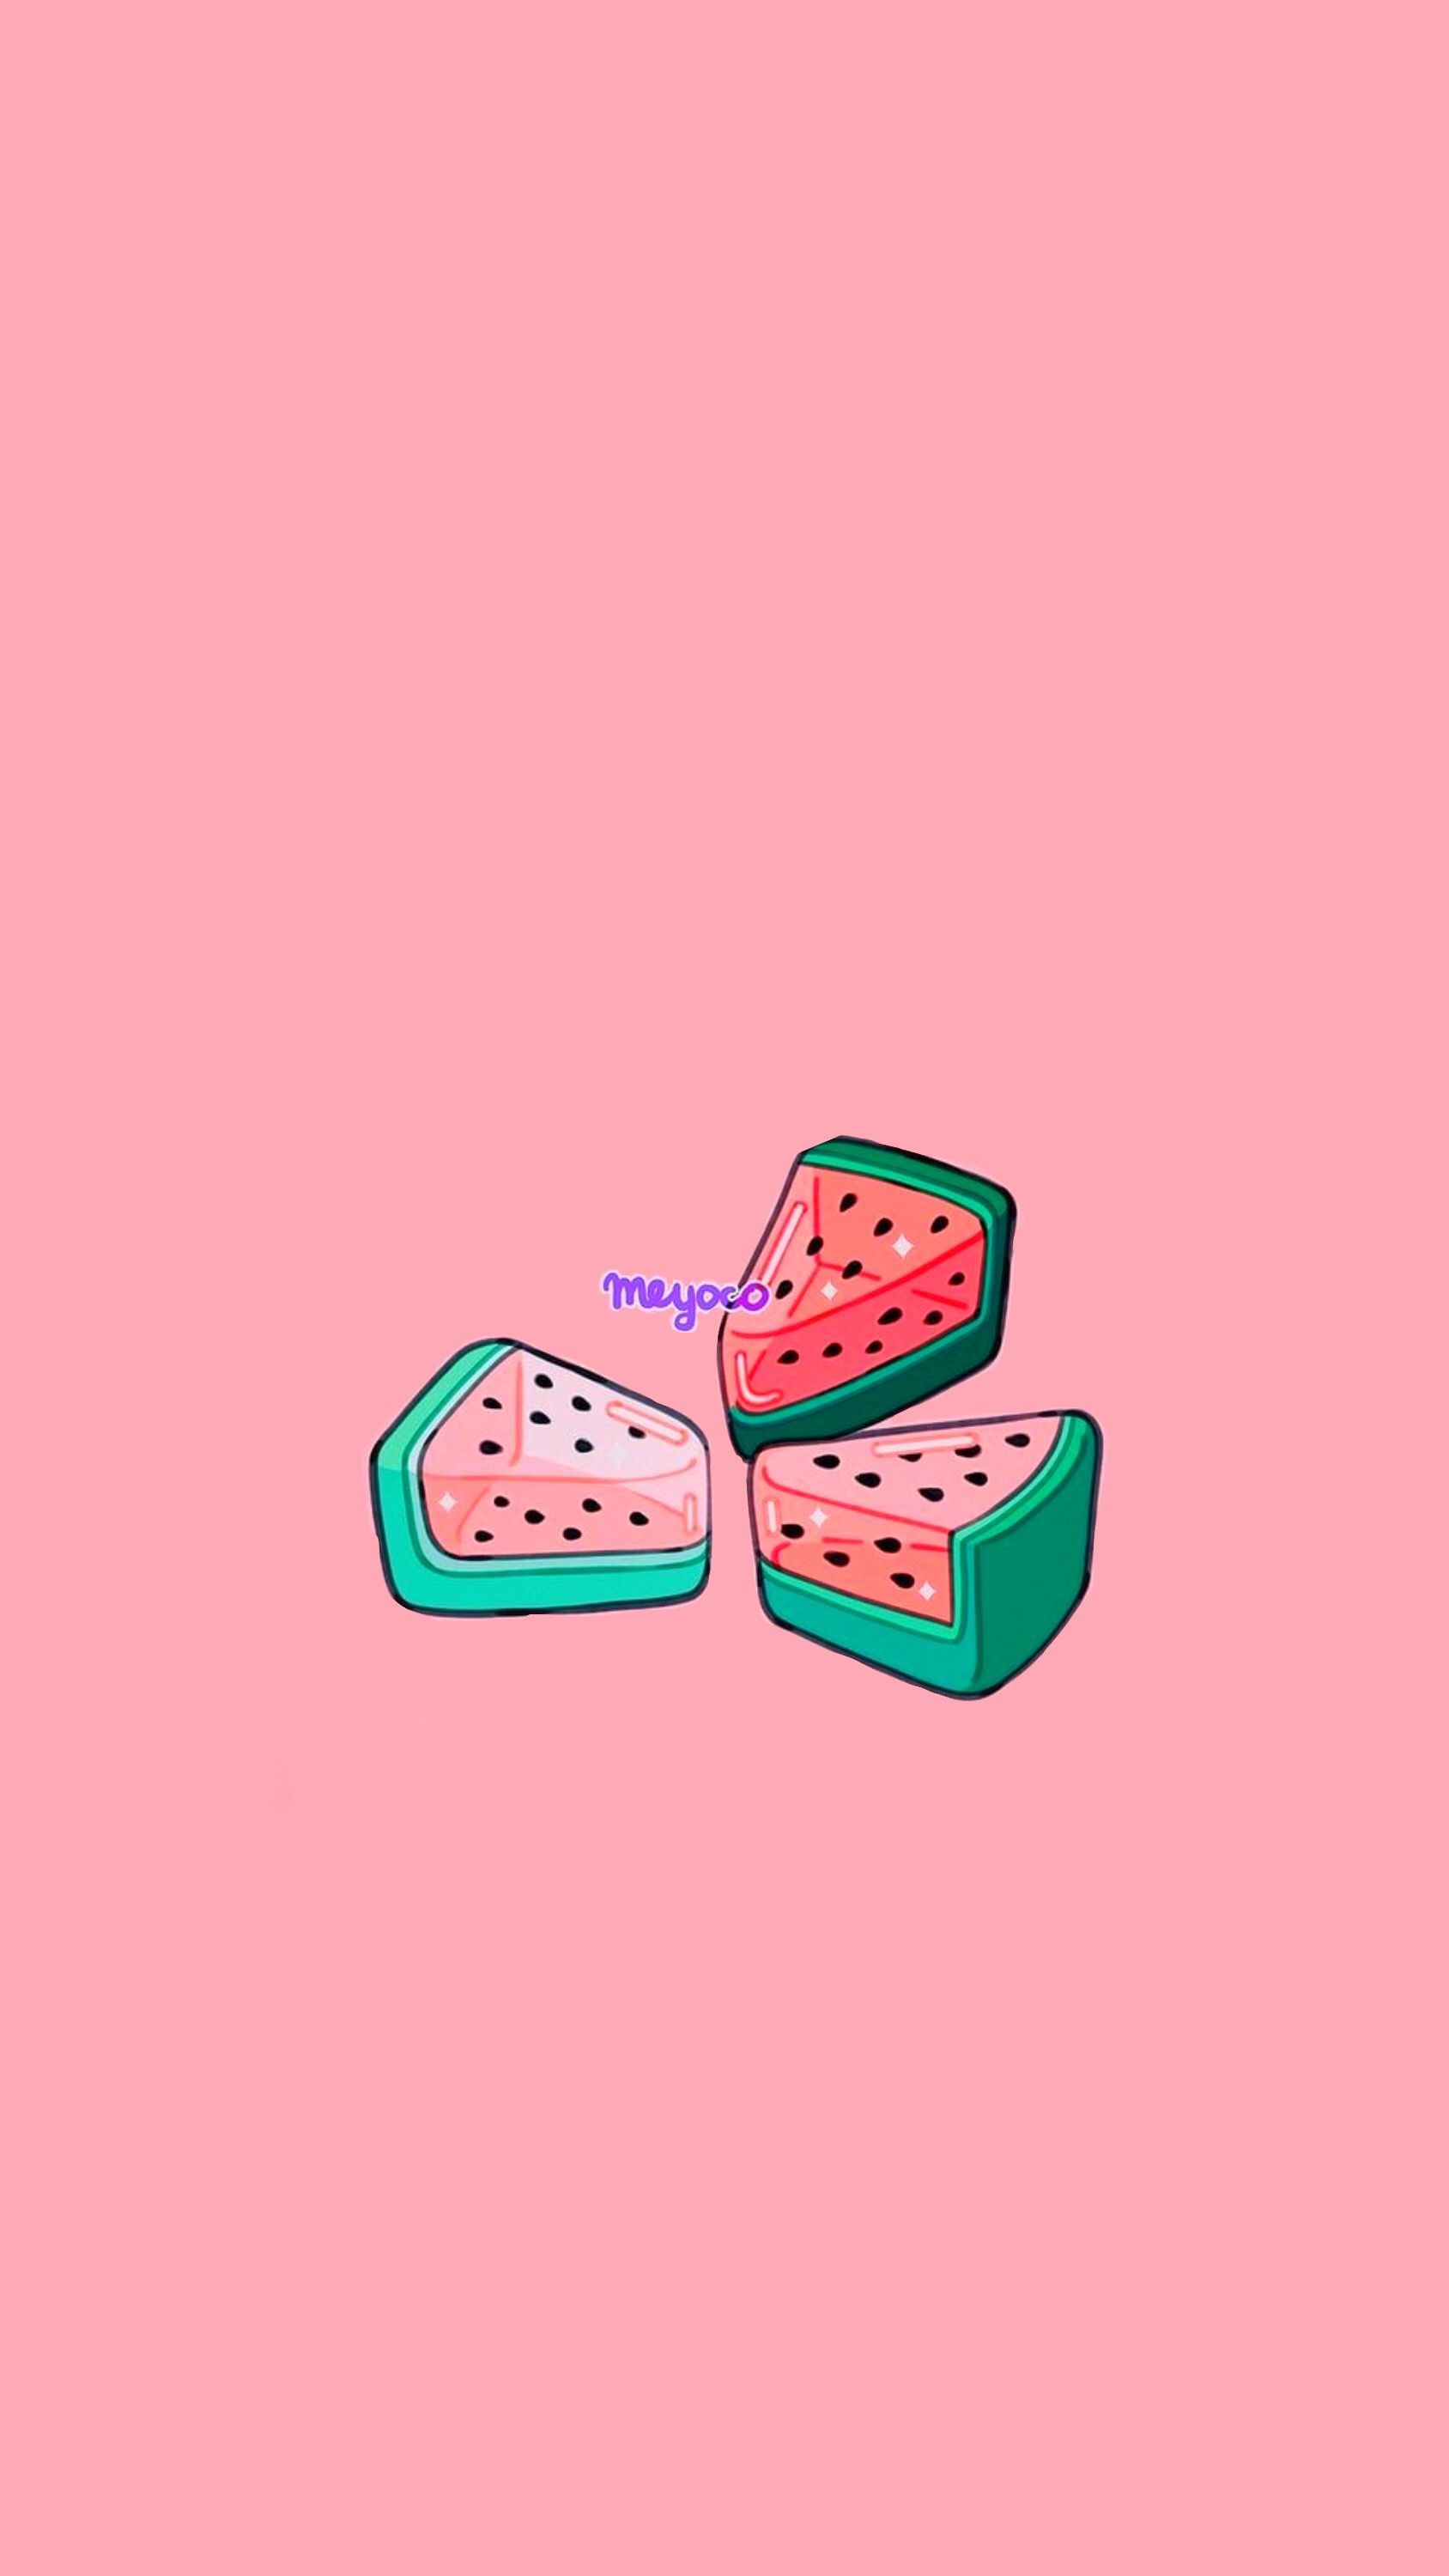 A pink background with watermelon slices on it - Watermelon